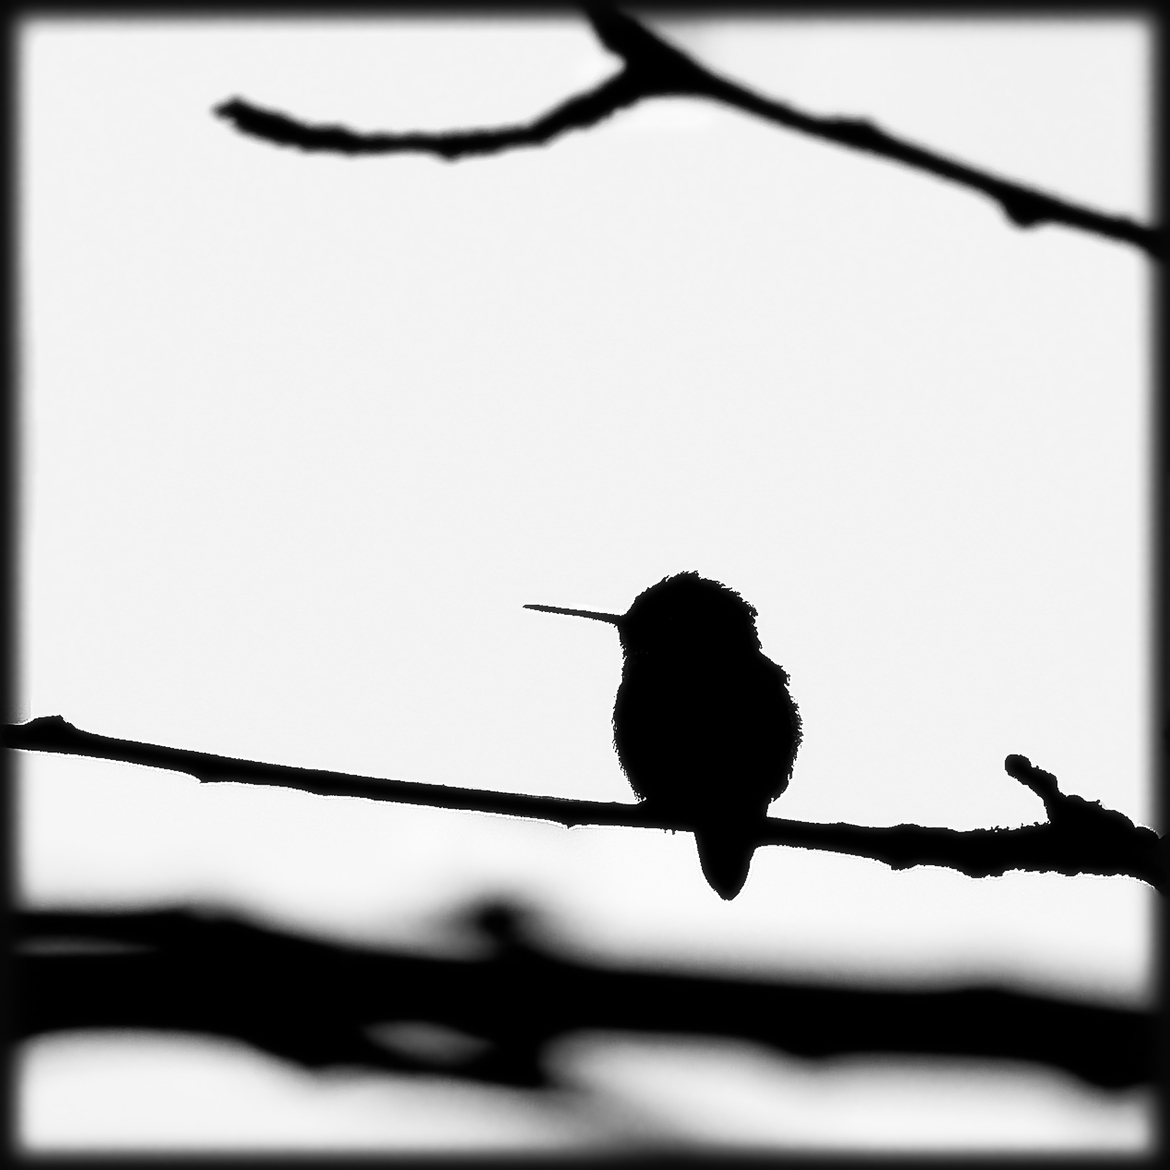 500px / Hummingbird silhouette by Rick Brown